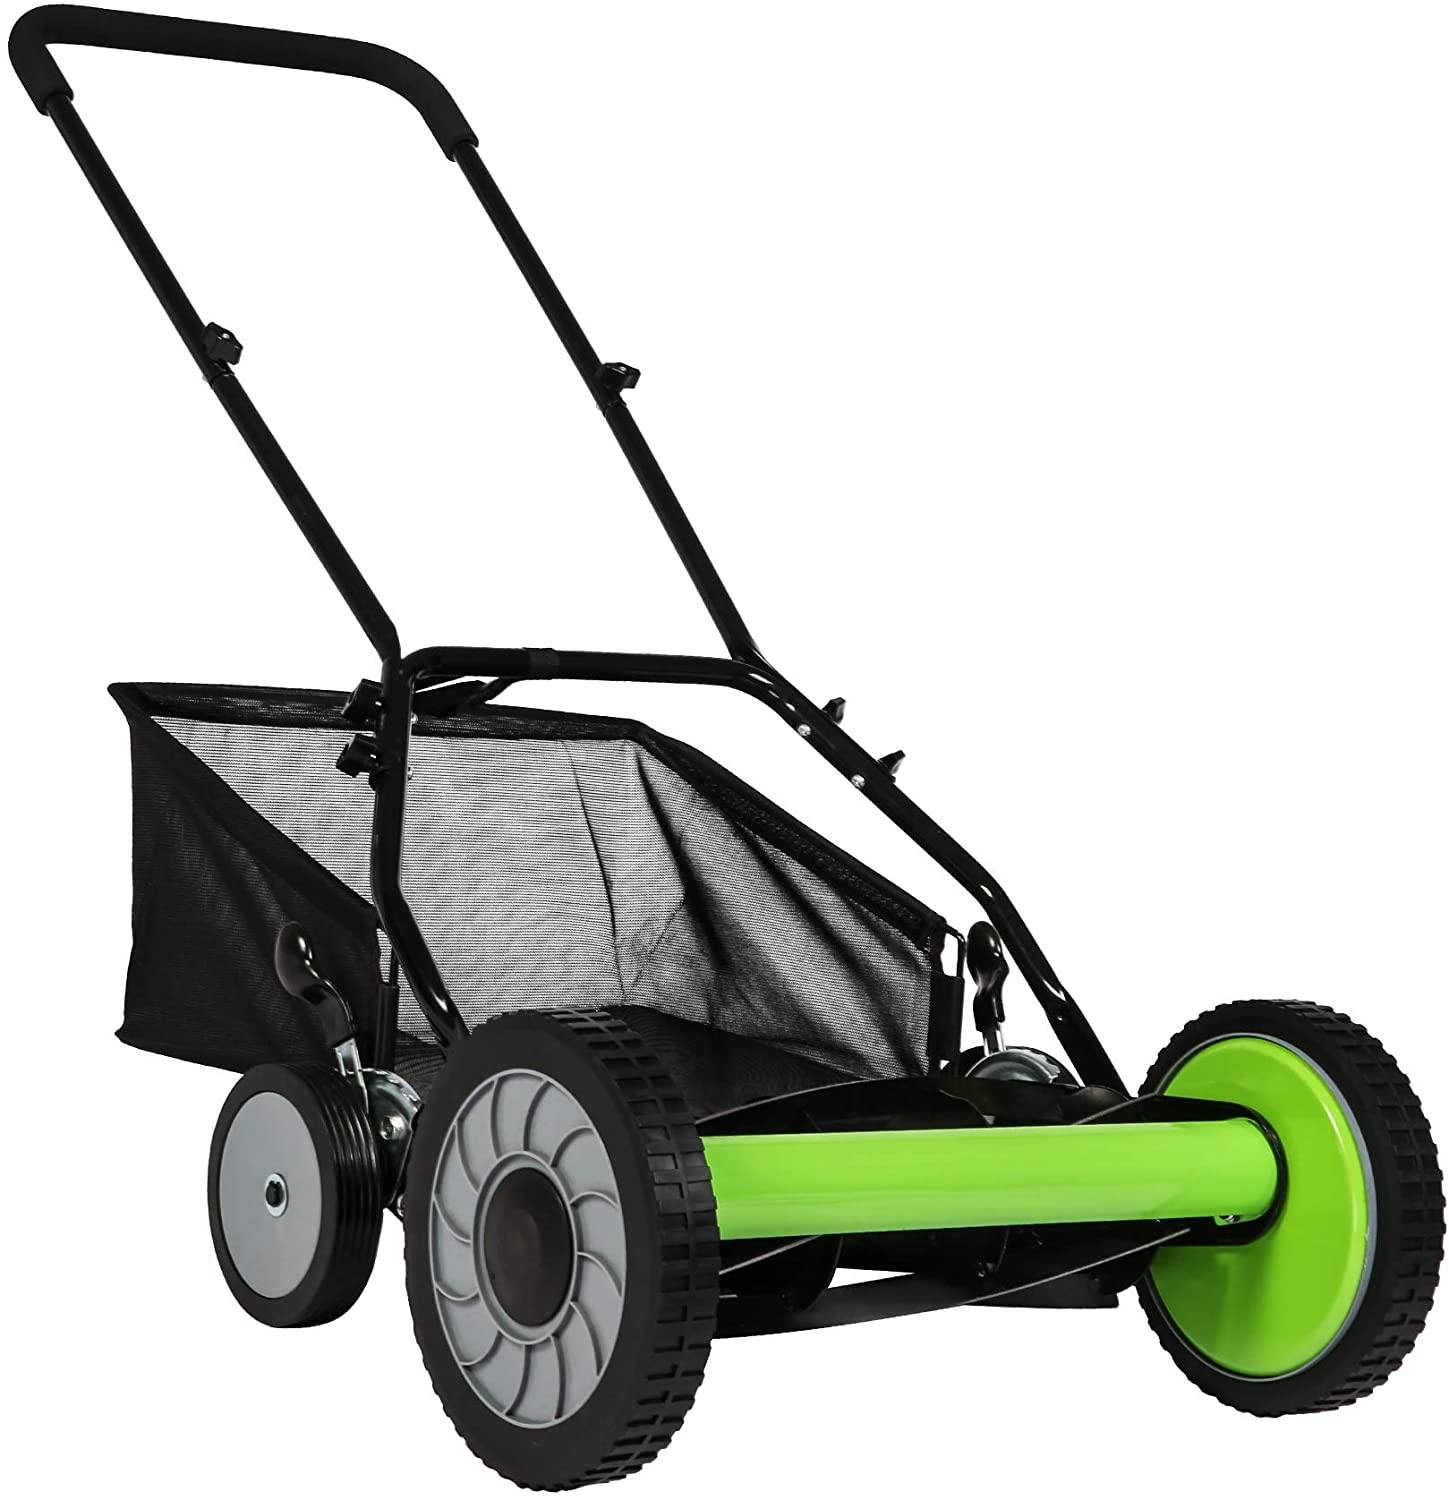 16-Inch Manual Reel Mower Adjustable 5-Blade Push Lawn Mower with Catcher (Four Wheeled) - Bosonshop